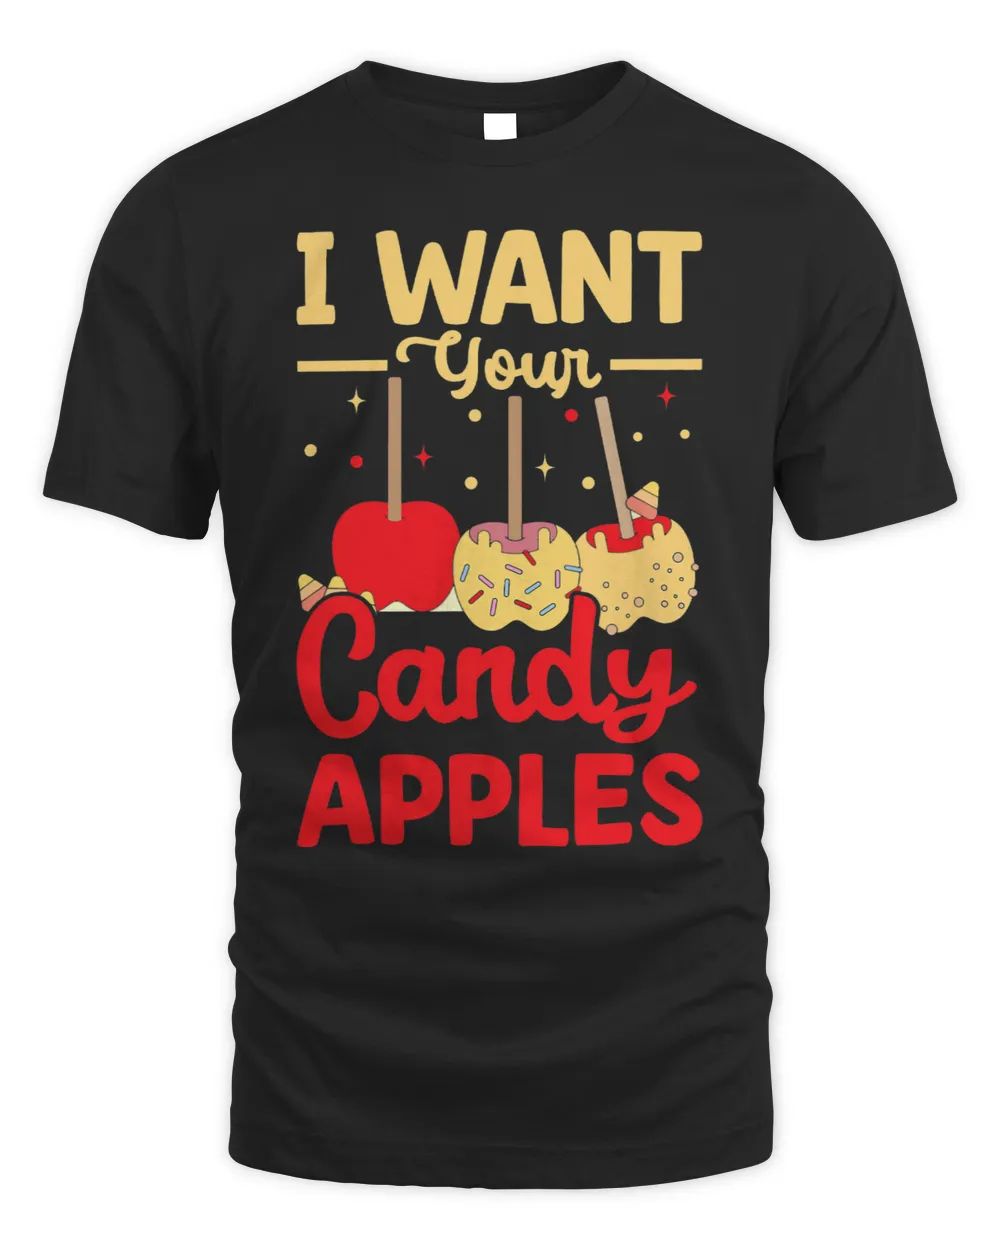 I Want Your Candy Apples Fruit Cute Fruit Eater Basket Picke